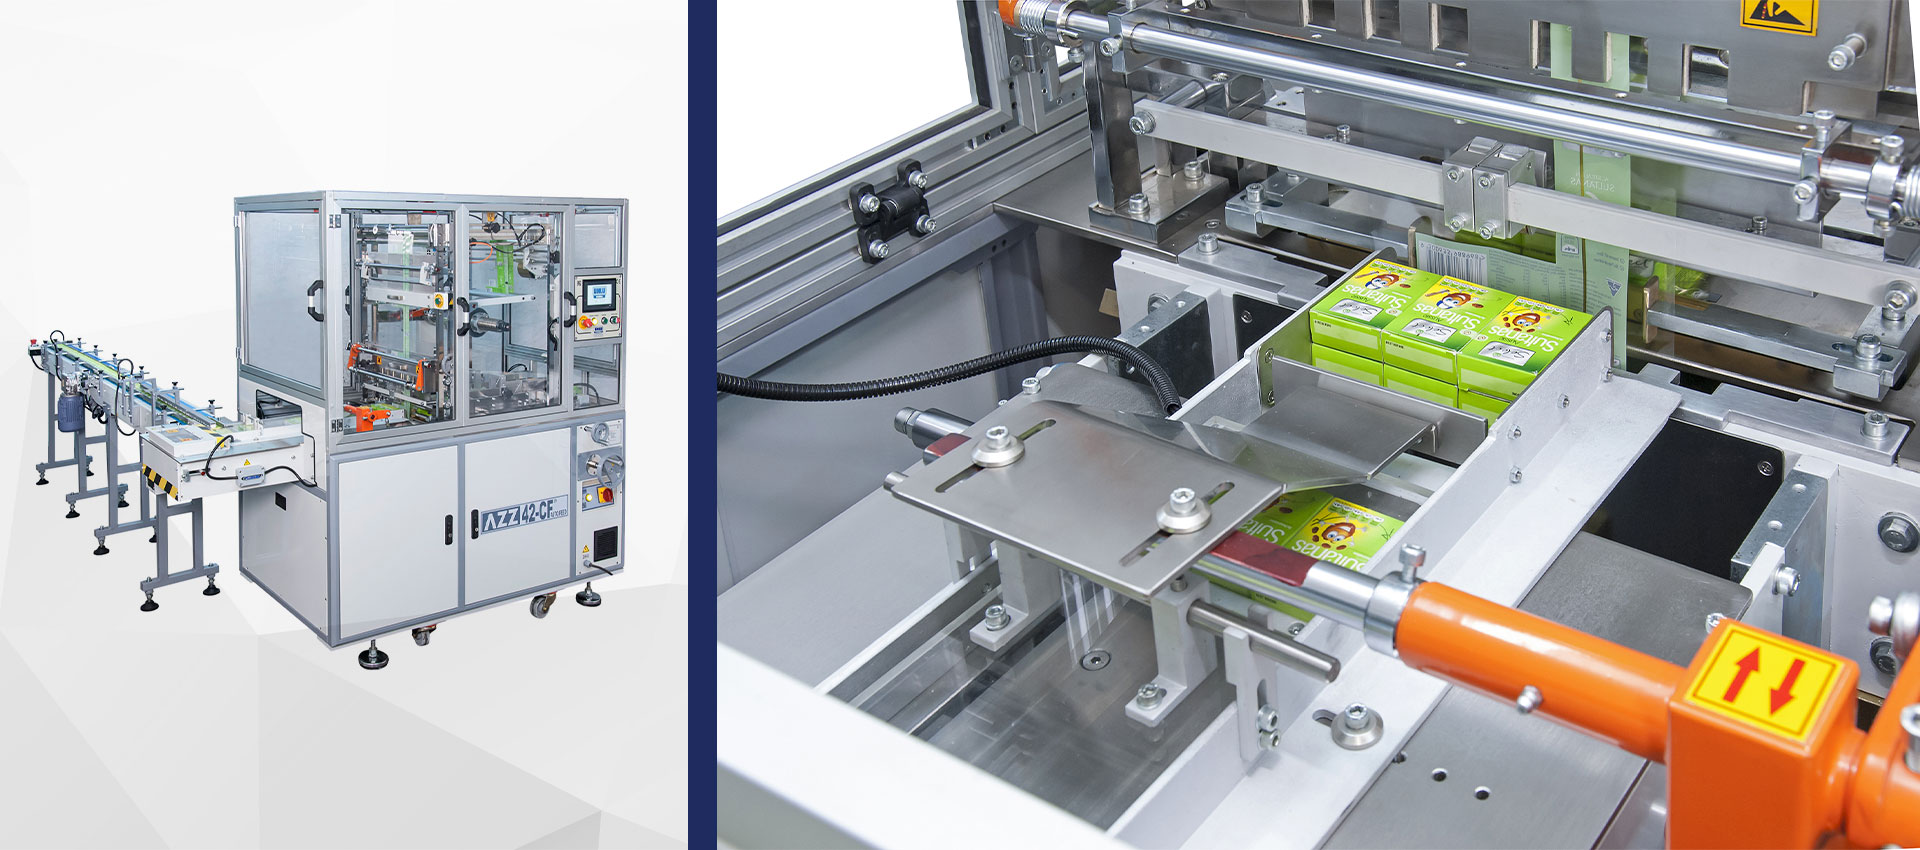 AZZ 42 - CF AUTO FEED | AUTOMATIC FEEDING - 3X2 SOAP ENVELOPE TYPE PACKAGING MACHINE